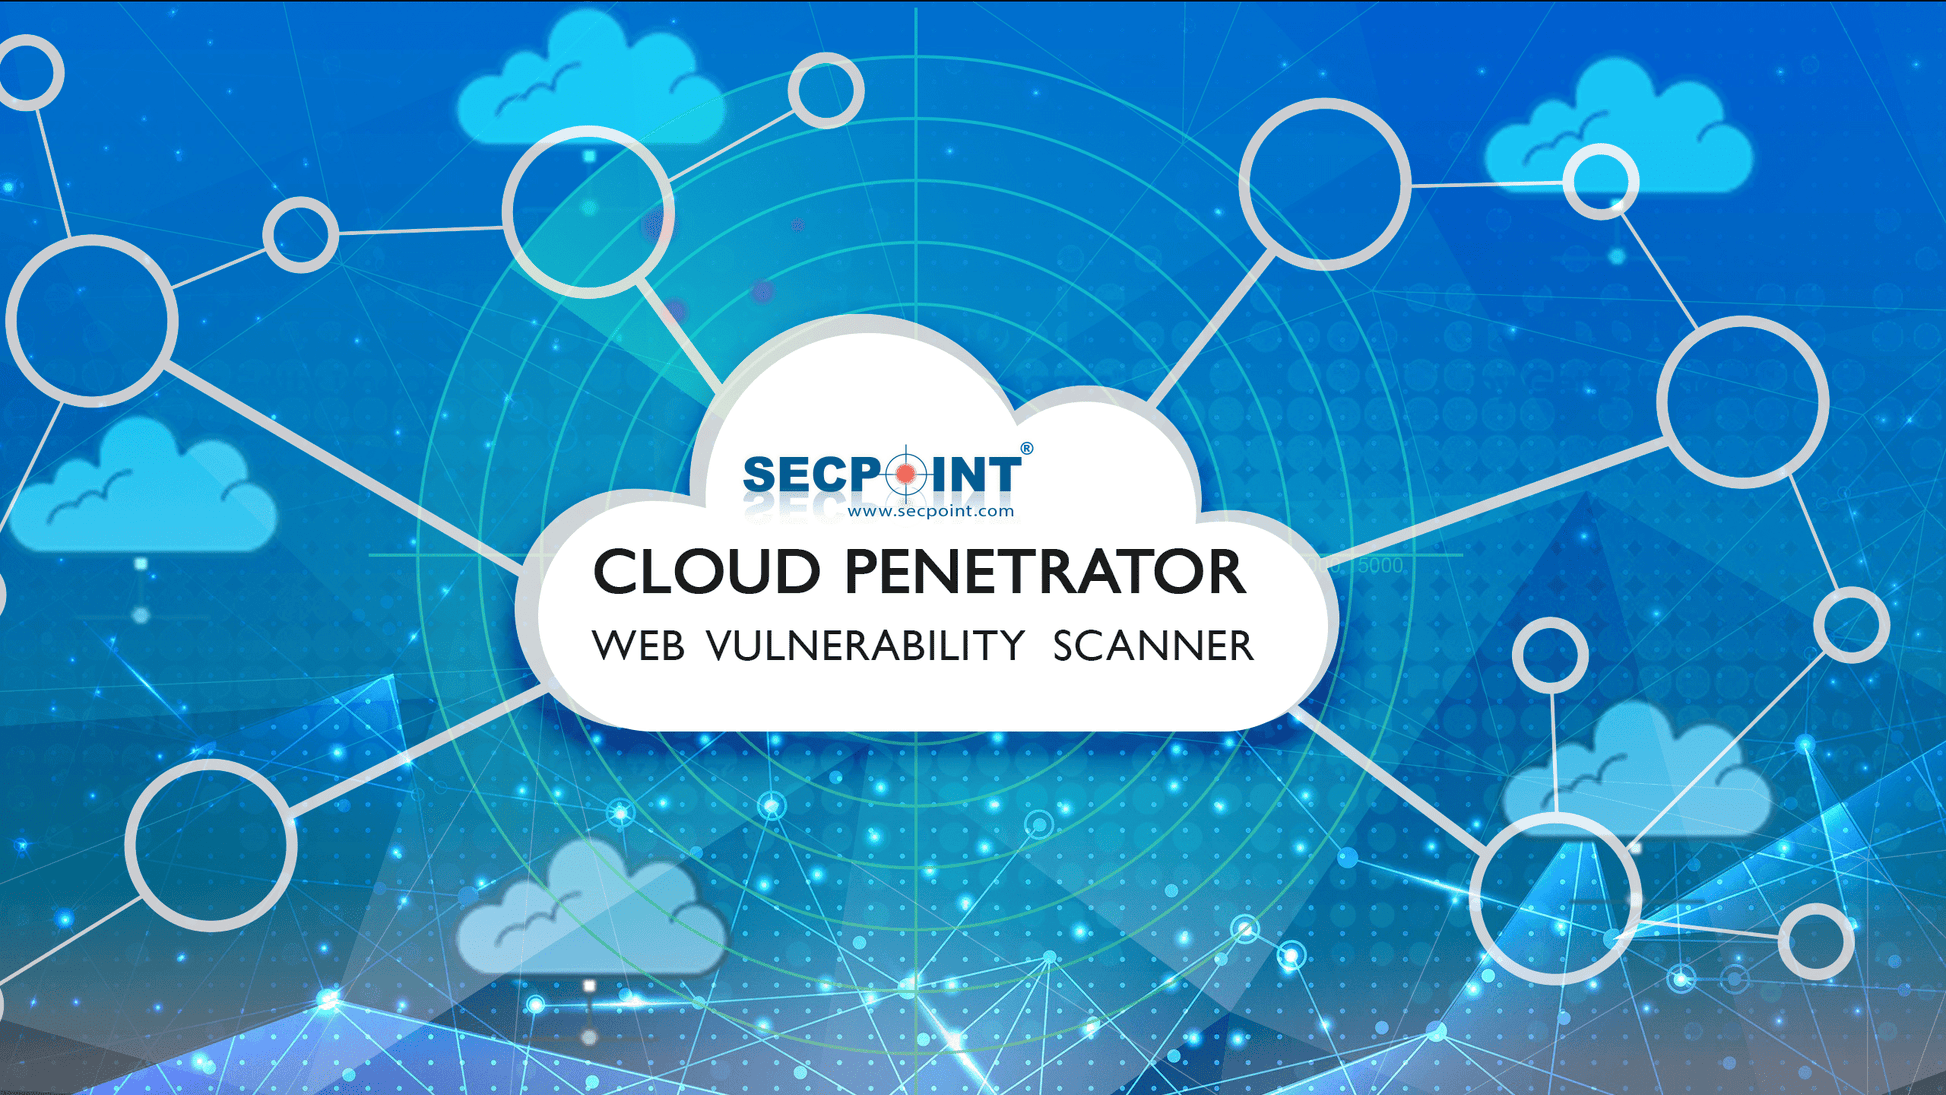 SecPoint Cloud Penetrator S9 - Vulnerability Scanning of 128 IP Static Scan License 1 Year - SecPoint